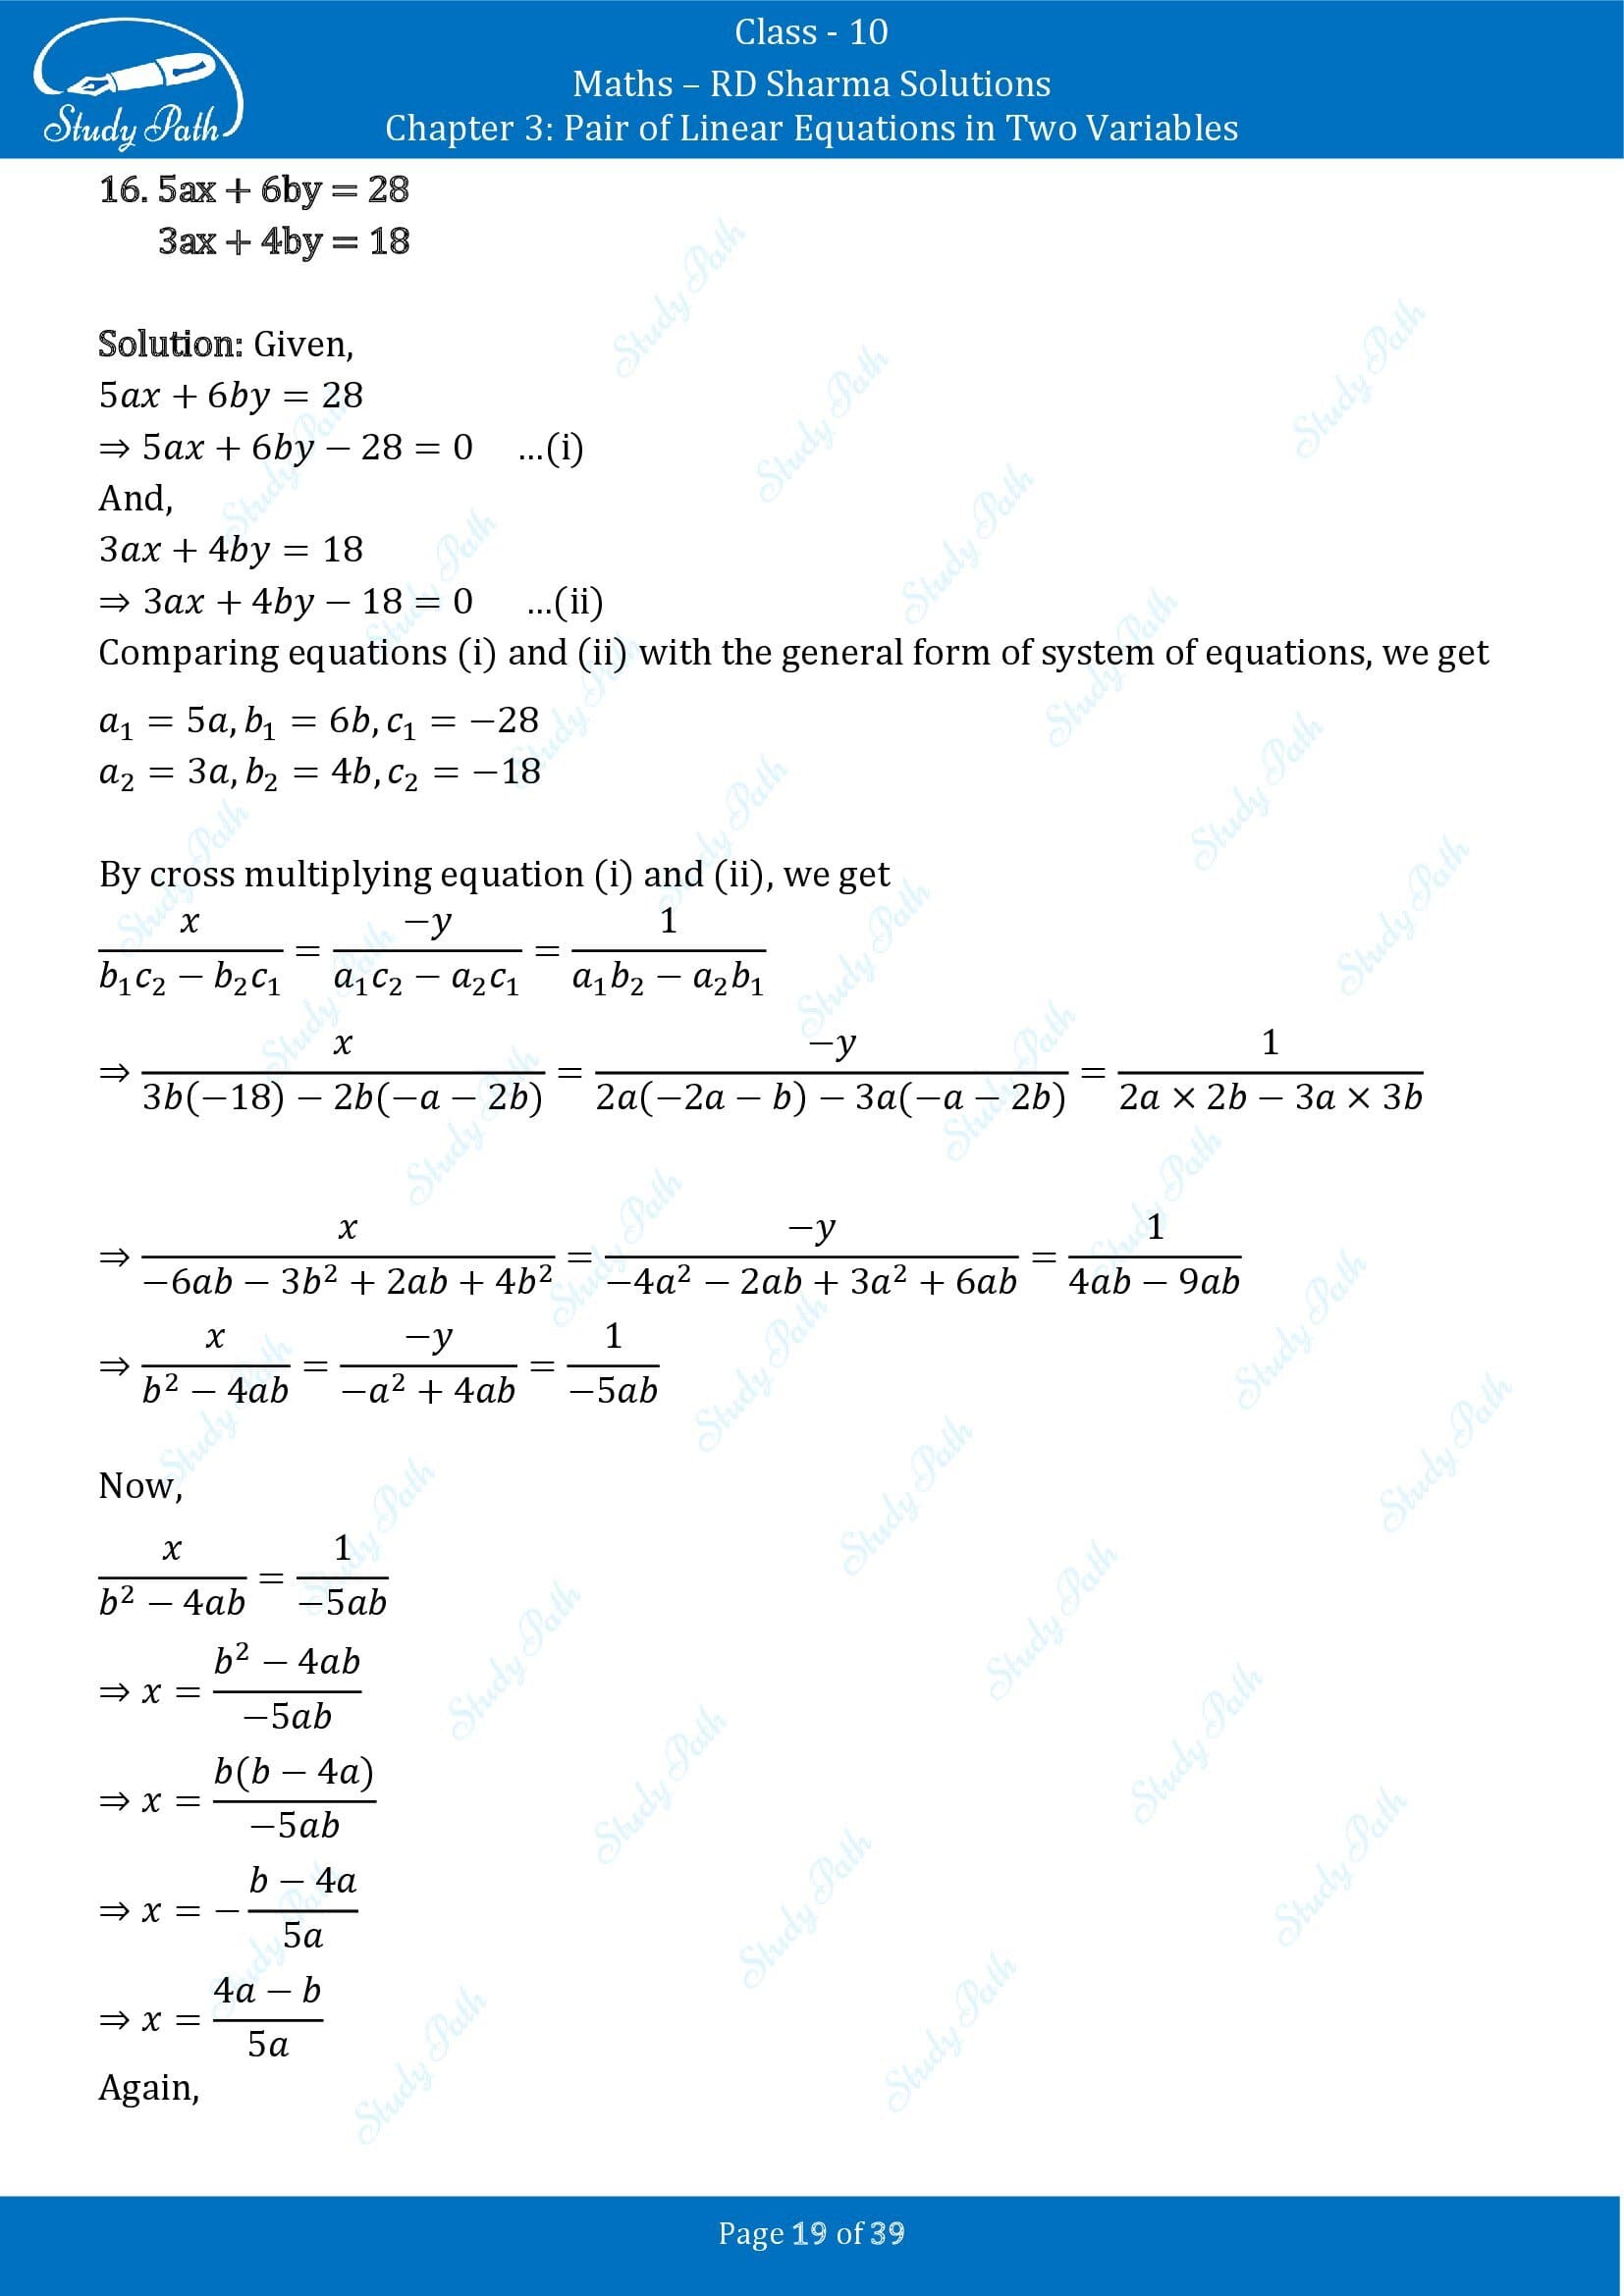 RD Sharma Solutions Class 10 Chapter 3 Pair of Linear Equations in Two Variables Exercise 3.4 00019